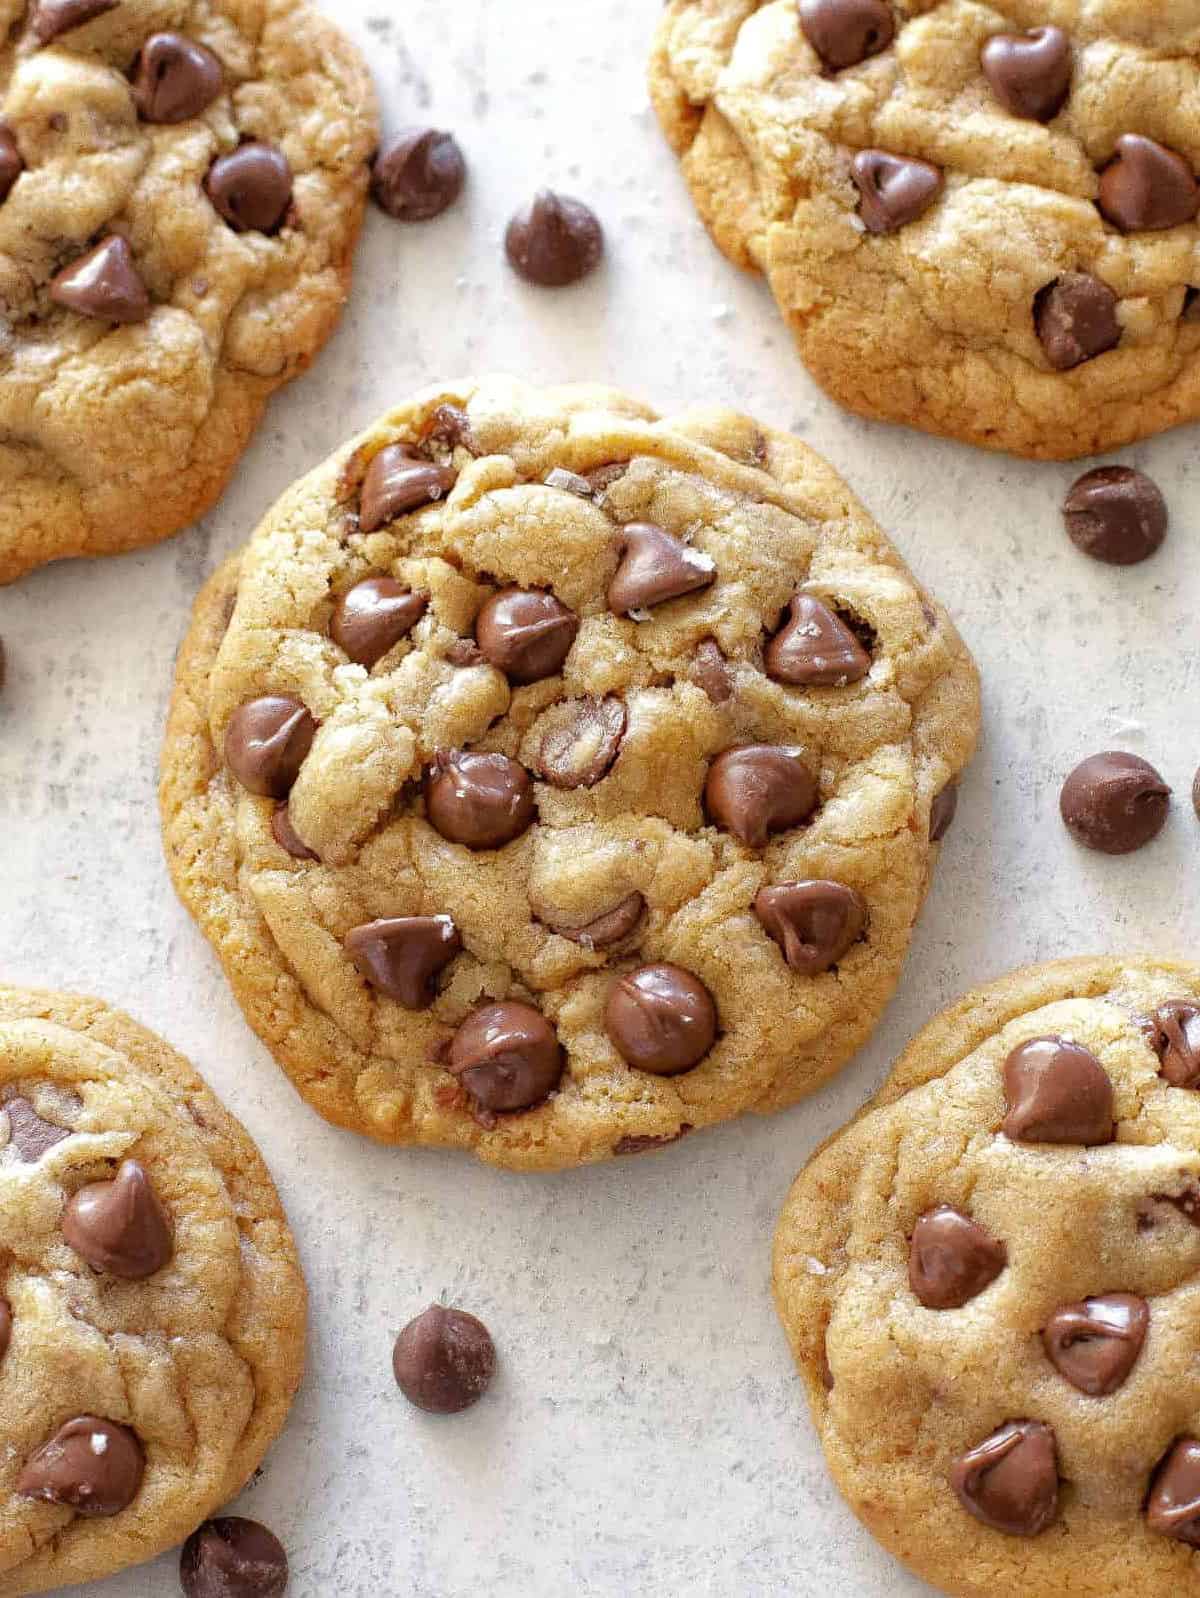  These cookies will leave you with a happy tummy and a smile on your face.